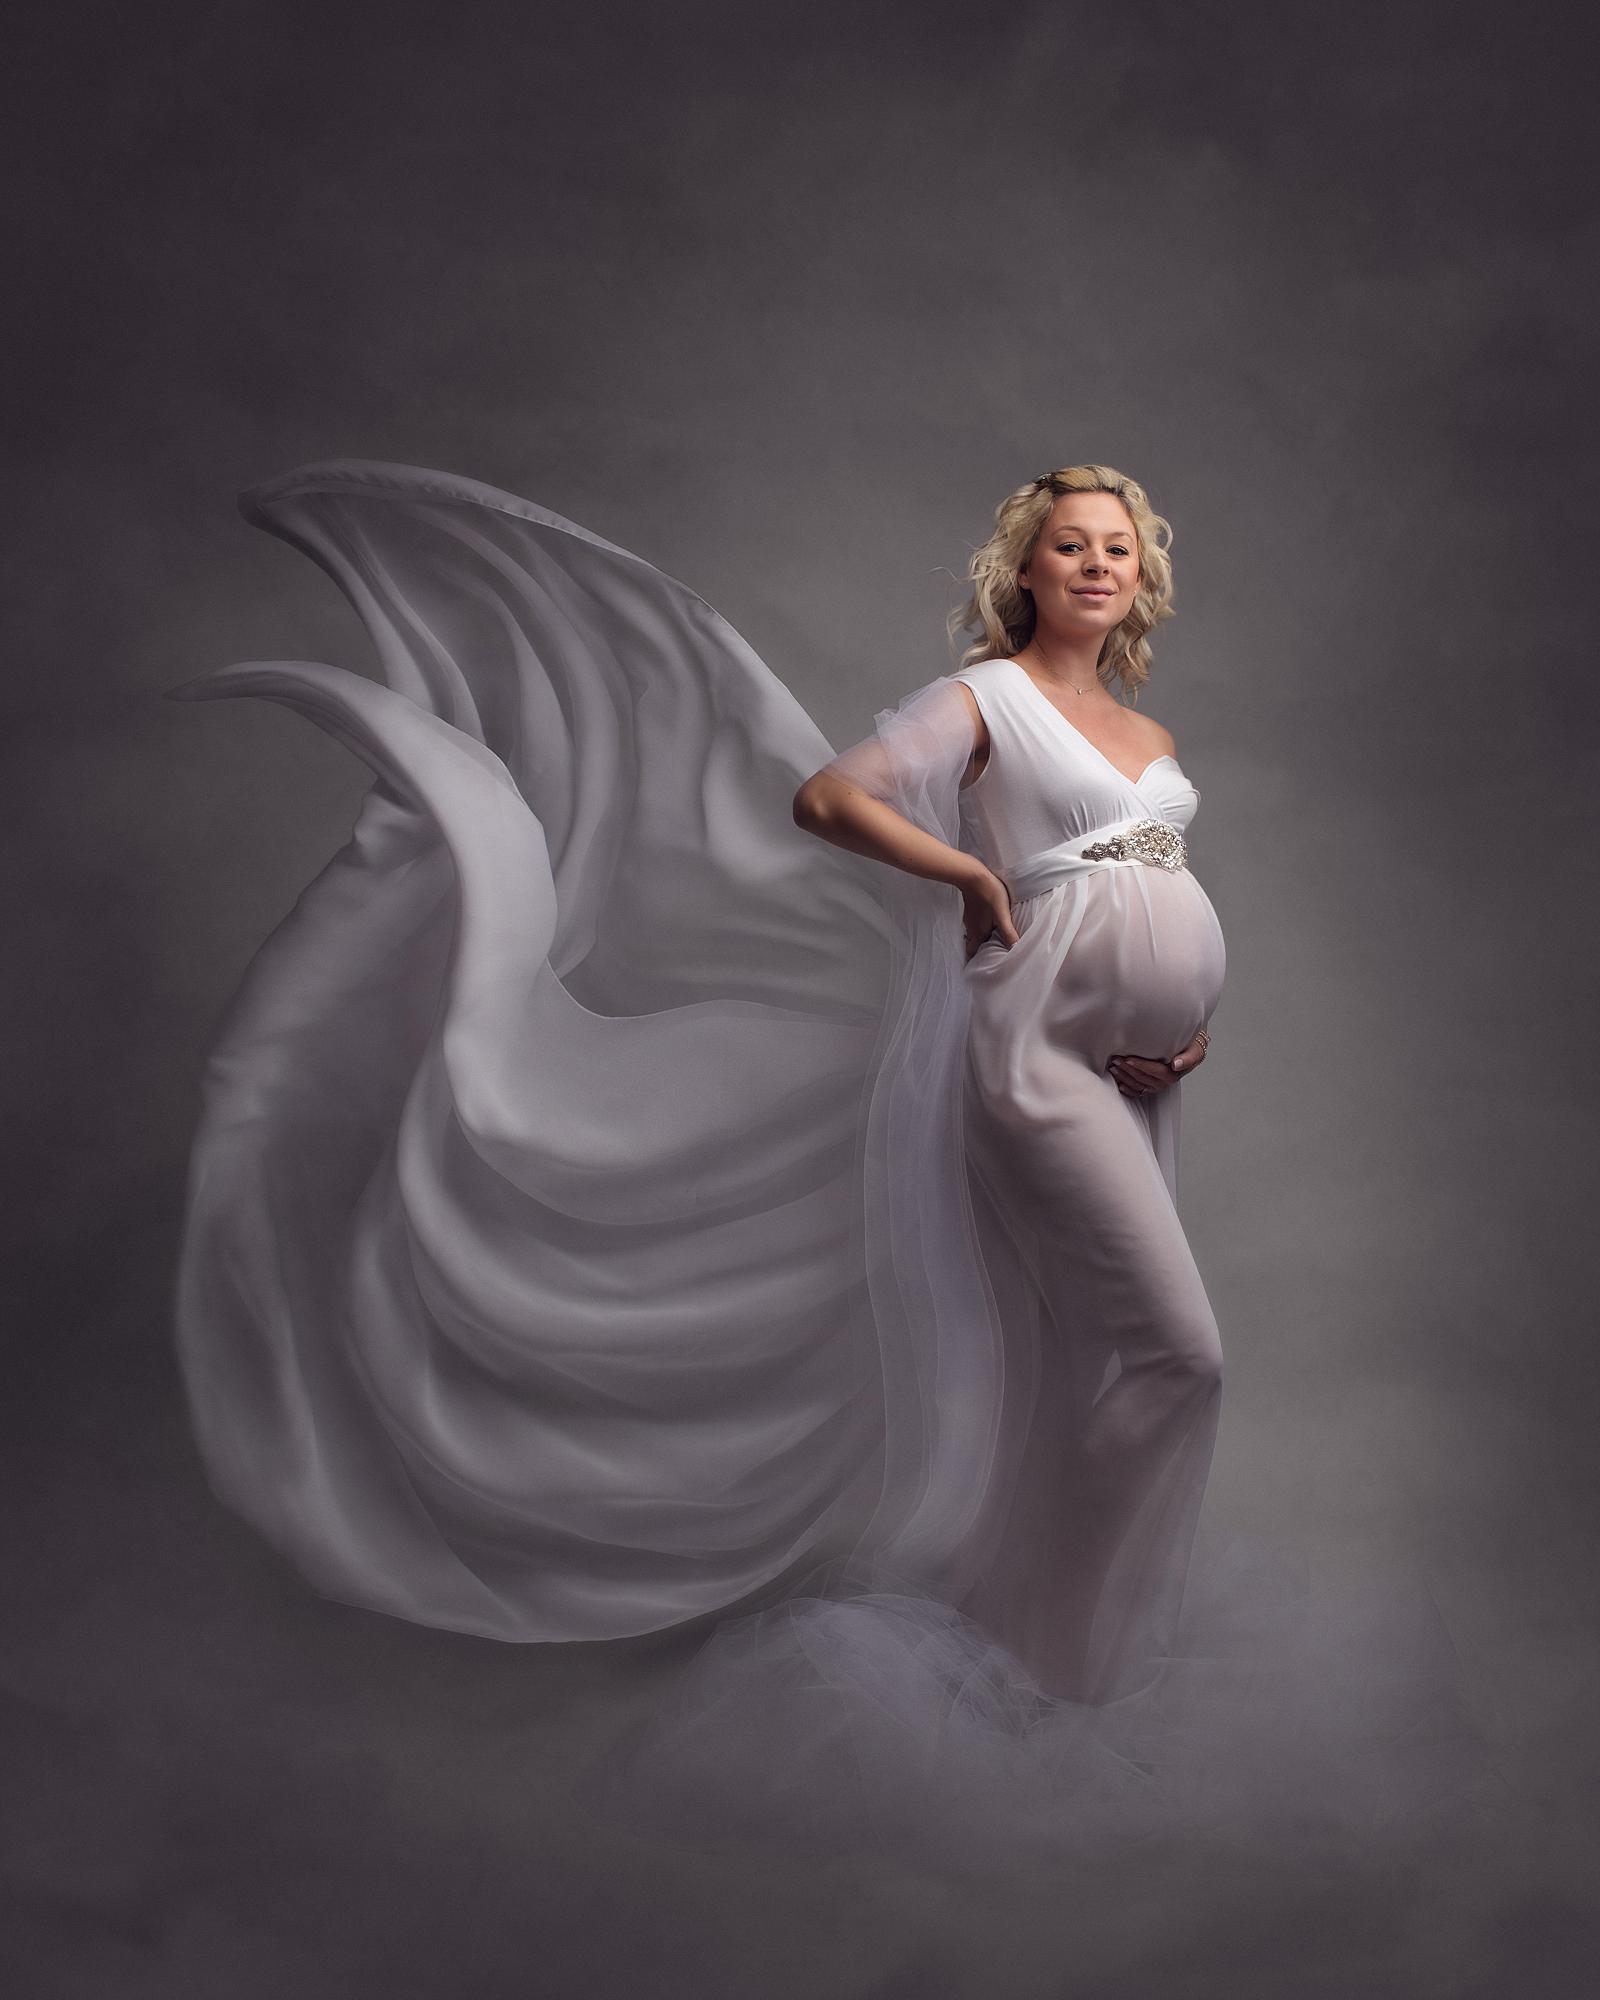 Pregnant woman posing in sheer white dress with flowing material for a maternity photoshoot in Alison McKenny's Suffolk studio